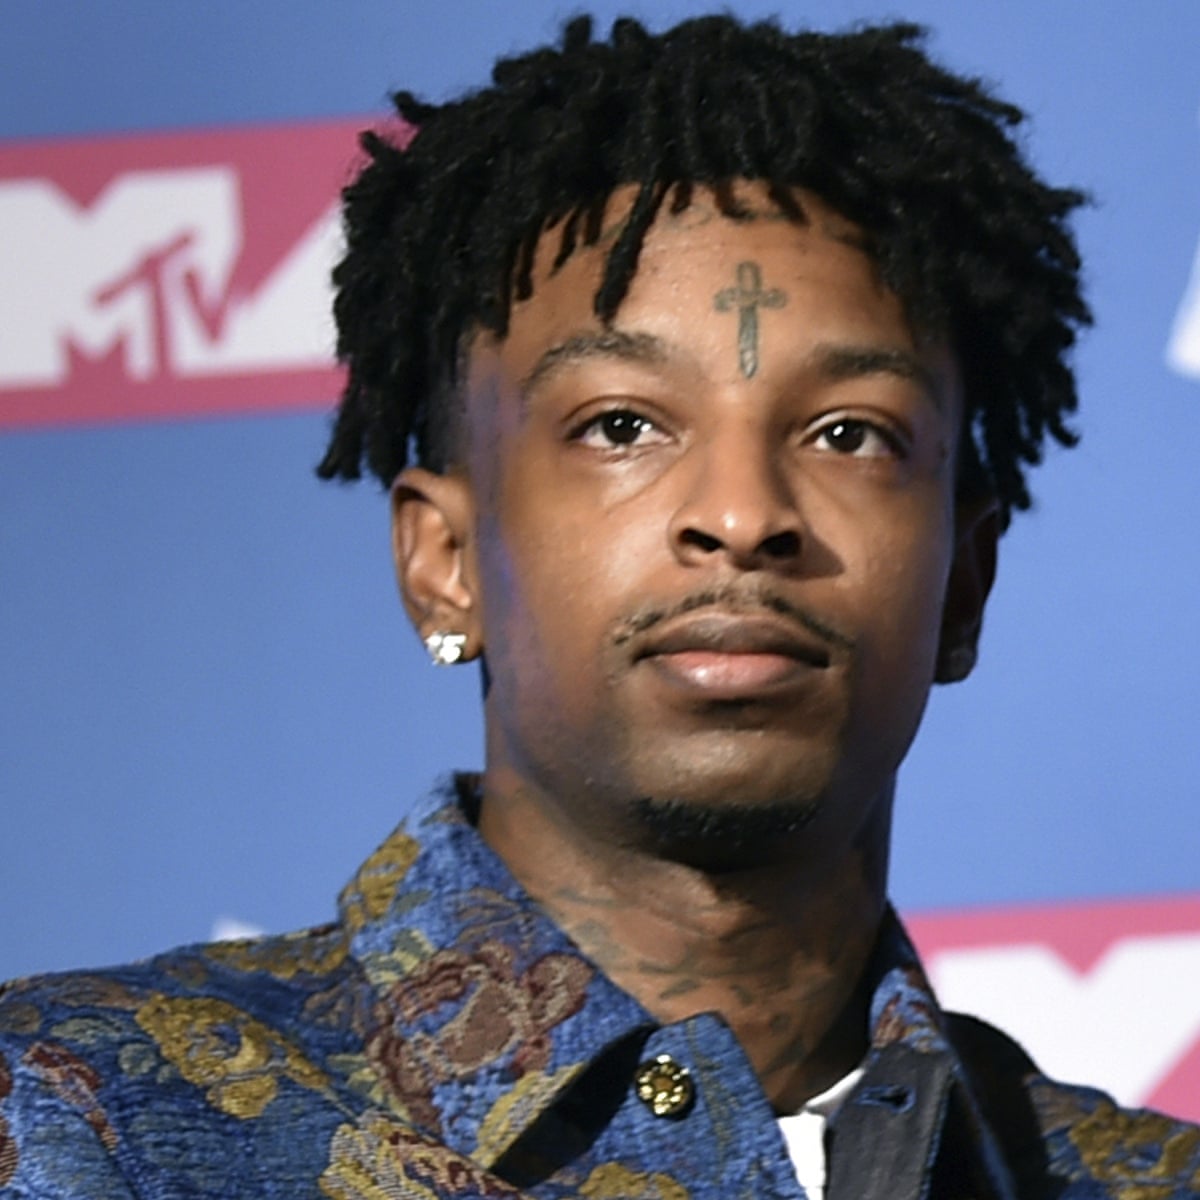 Rapper 21 Savage did not talk about being British for fear of US  deportation | 21 Savage | The Guardian